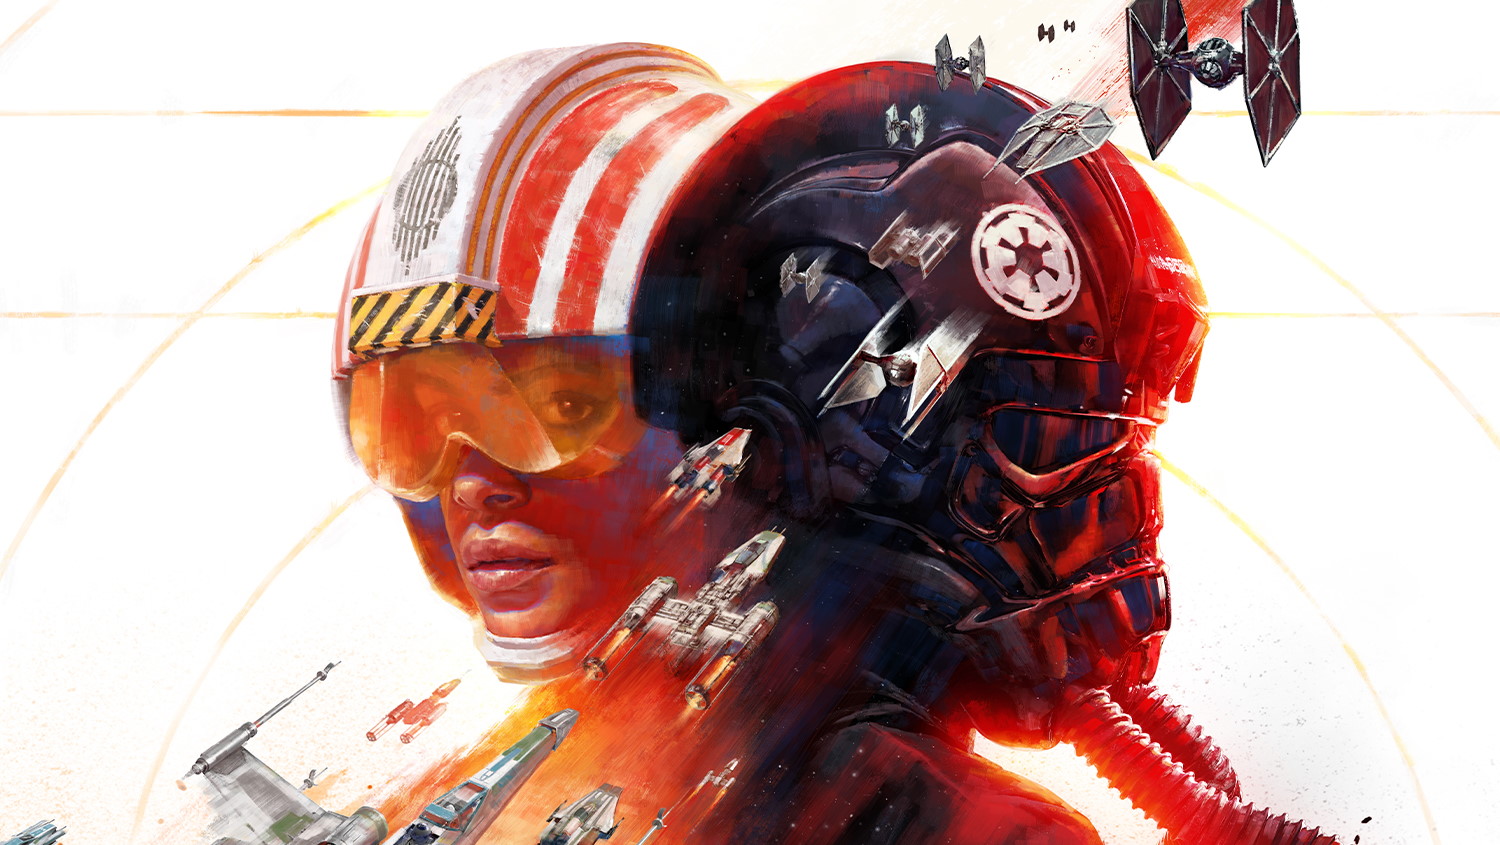 EA confirms Star Wars: Squadrons is real, official reveal coming next week